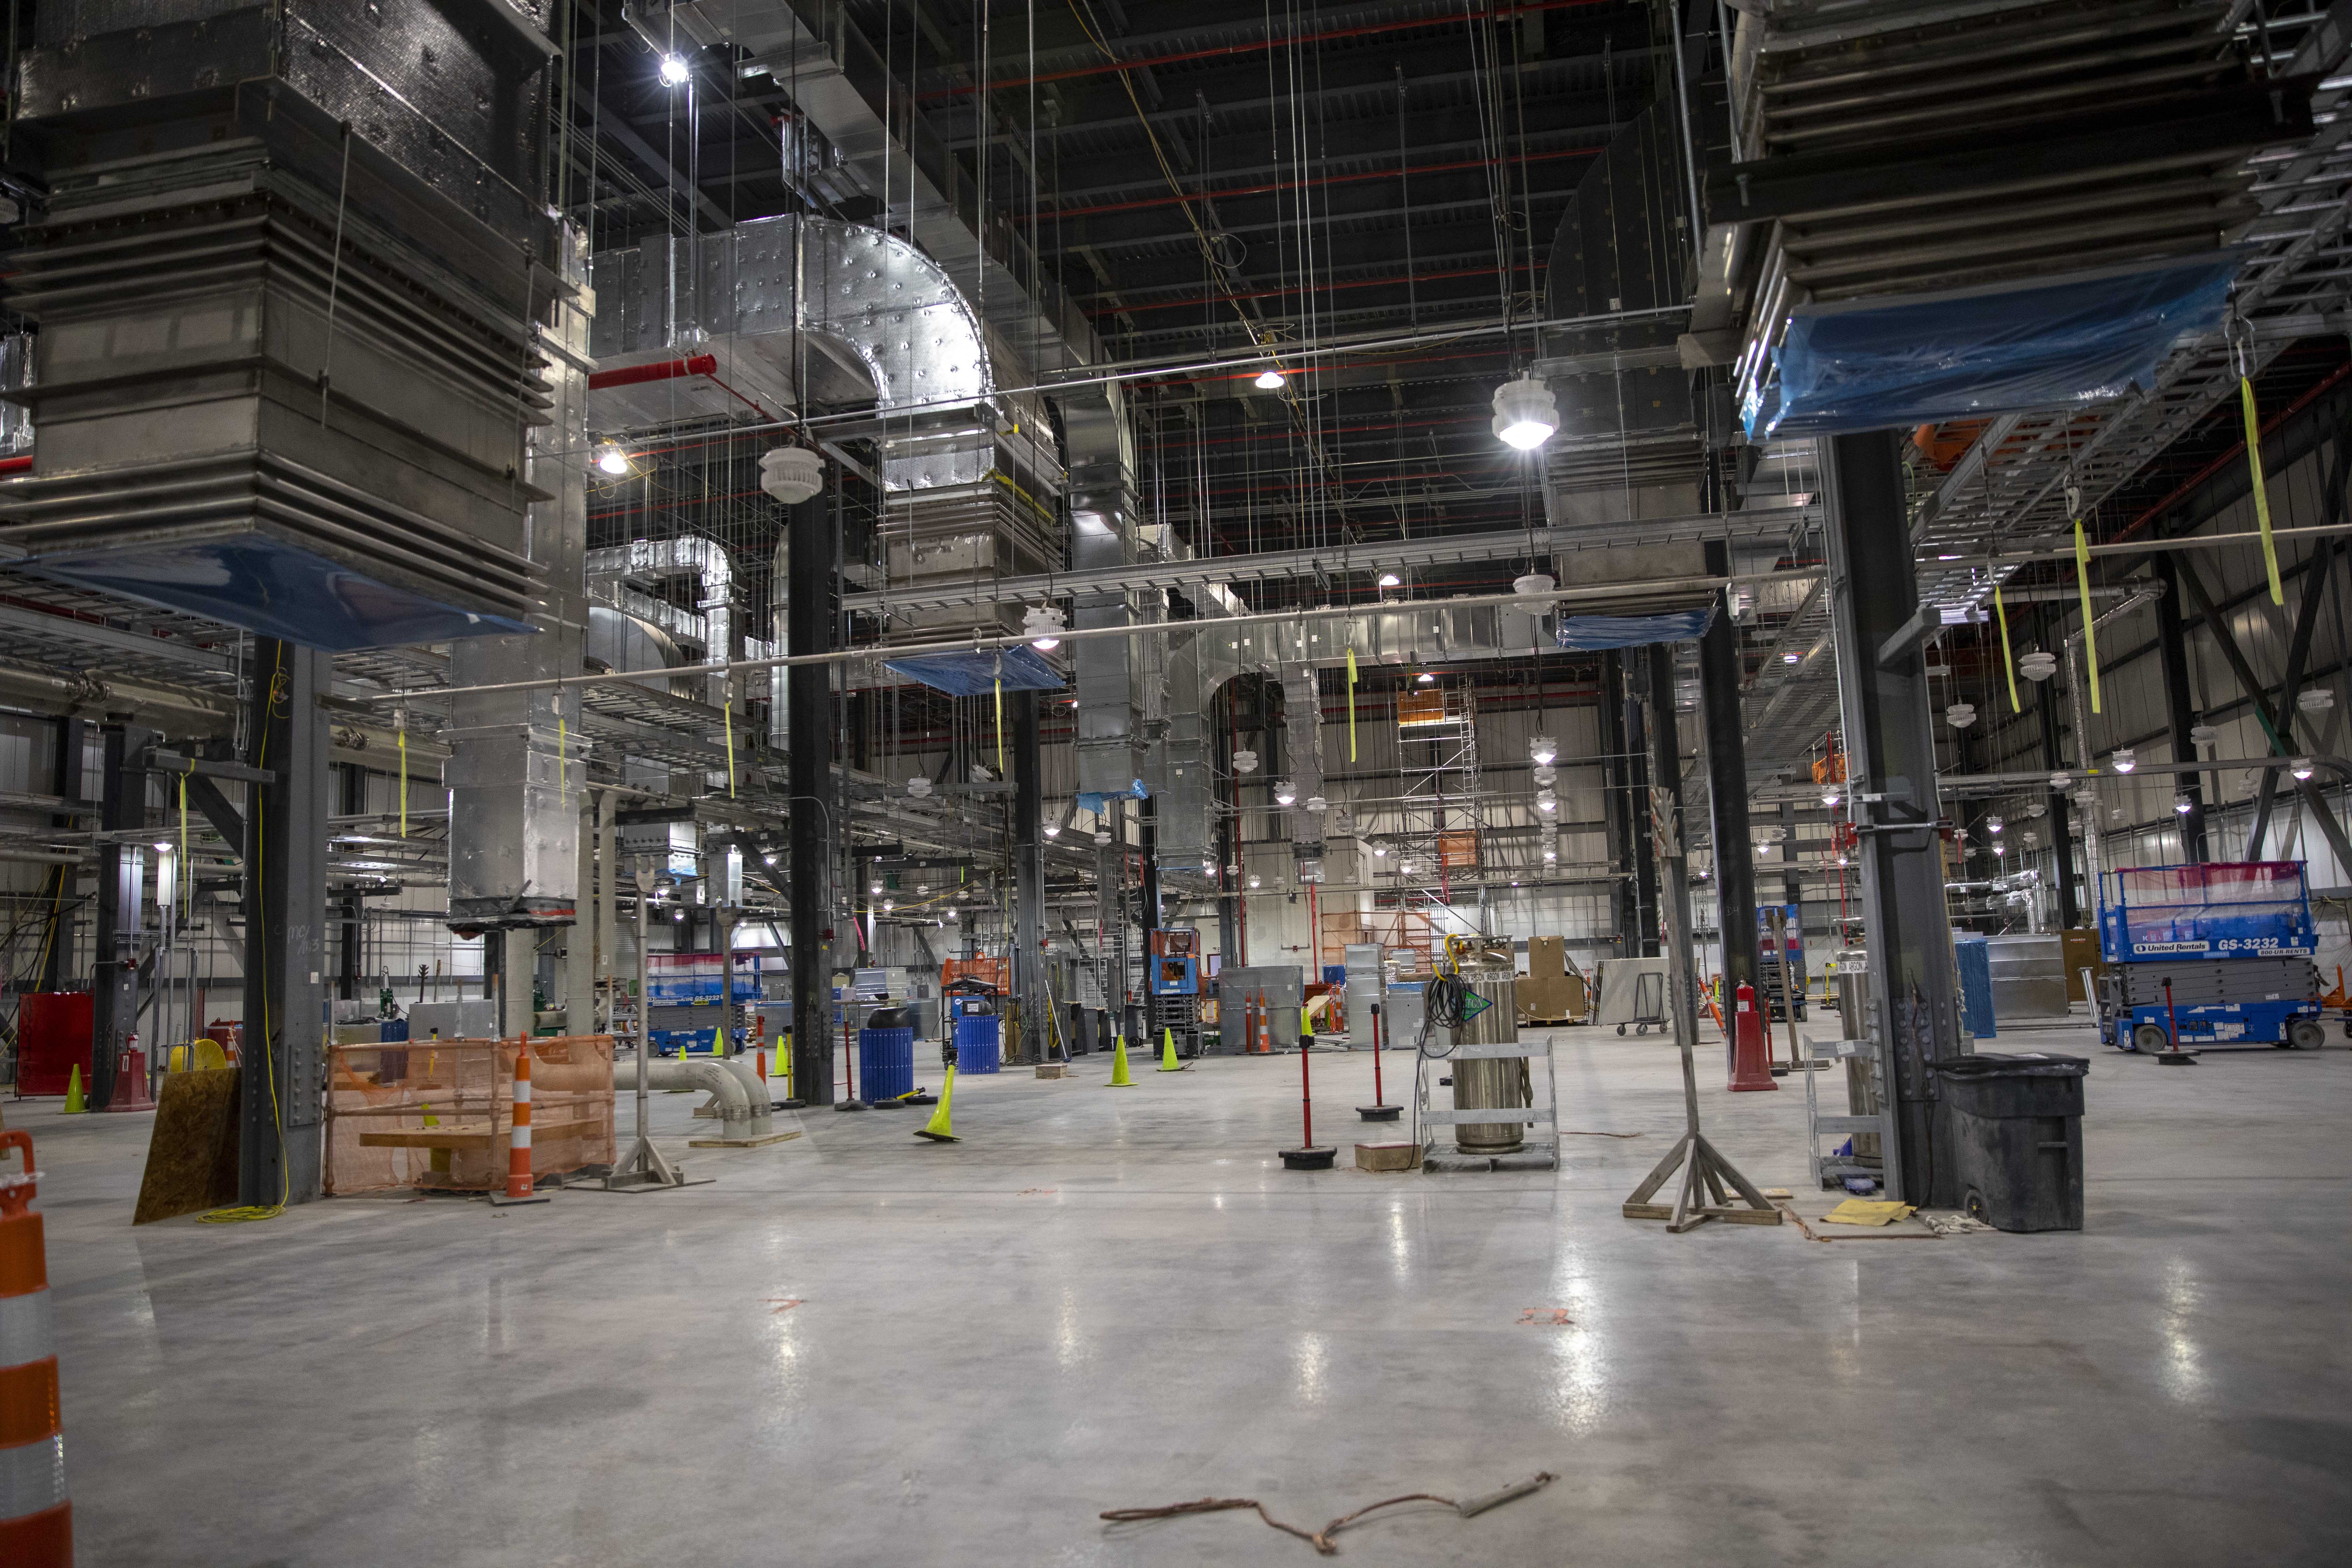 The Mechanical Electrical Building (MEB) continues to work through final construction activities to support turn-over to start-up in July and August